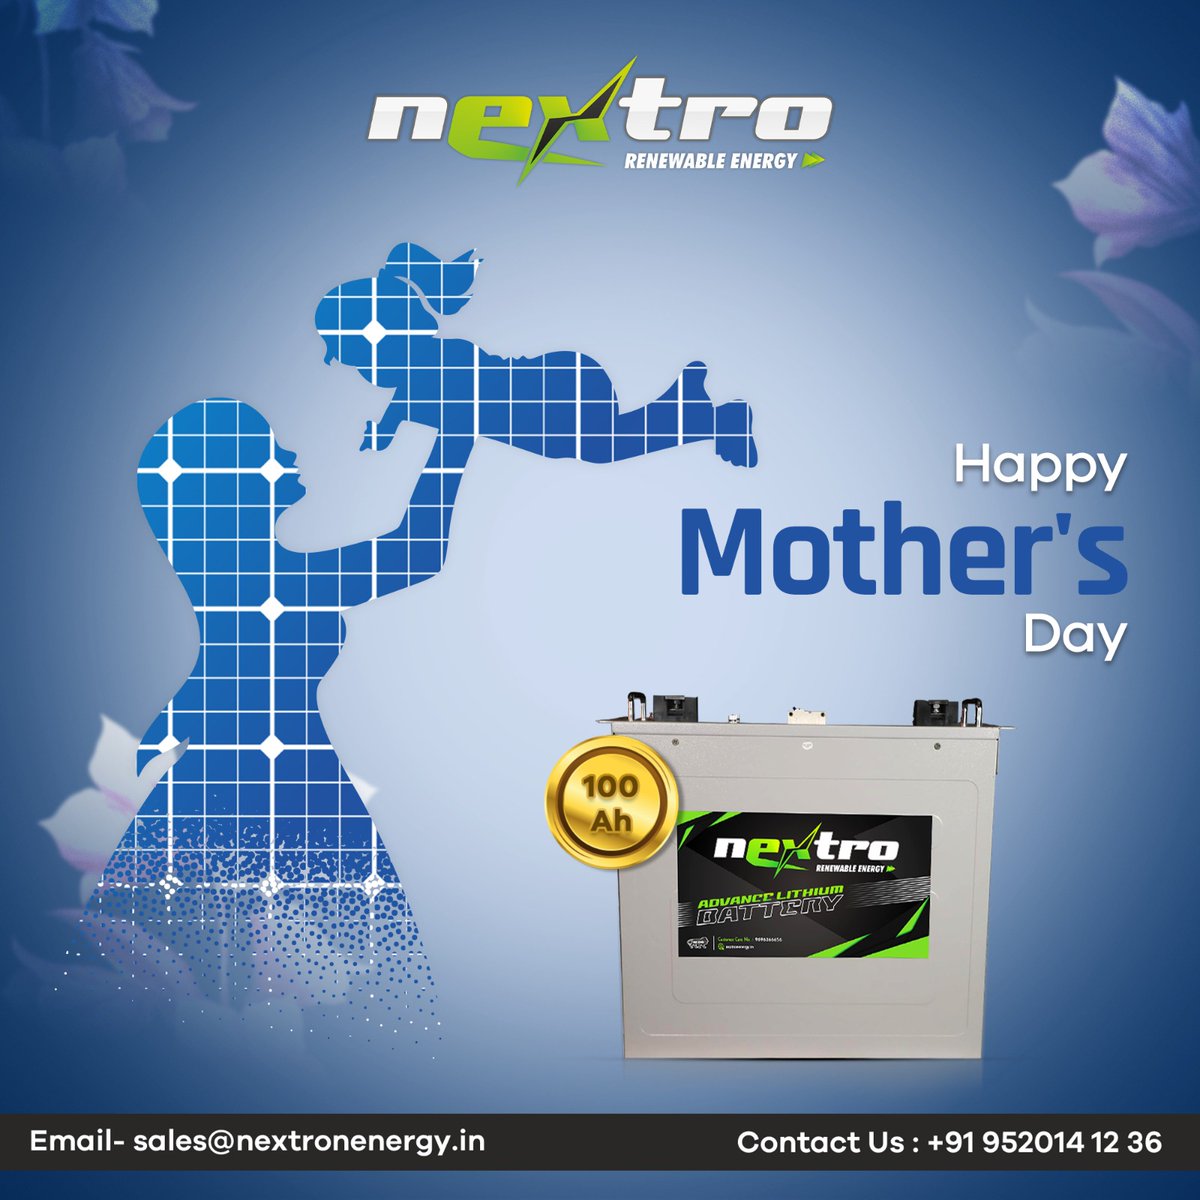 Happy Mother's Day to the woman who has nurtured us with love and kindness.
We are forever grateful to you.

#mothersday #mothersday2024 #happymothersday #celebratingmothers #MomentsWithMom #MothersDaySpecial #momsarethebest #NextroBattery #Battery #LithiumIon